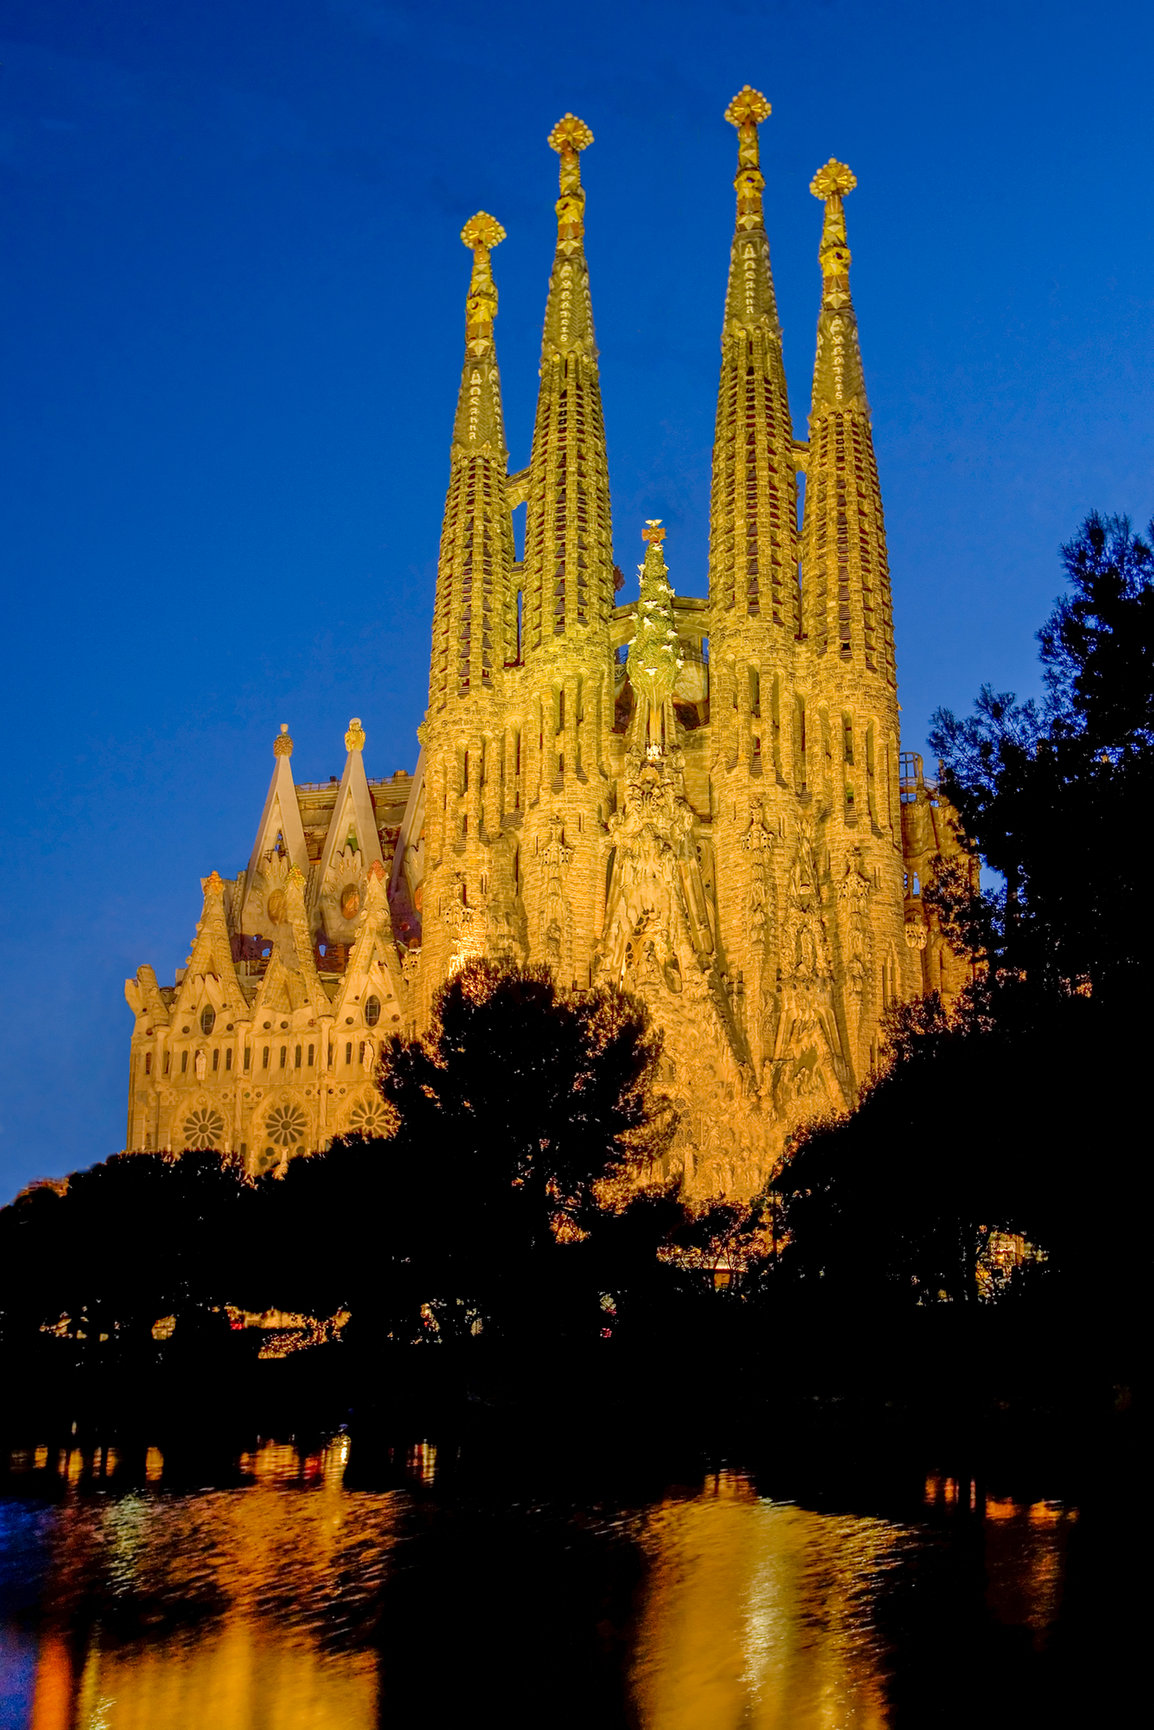 An awesome cathedral in Spain - Jim Zuckerman photography & photo tours